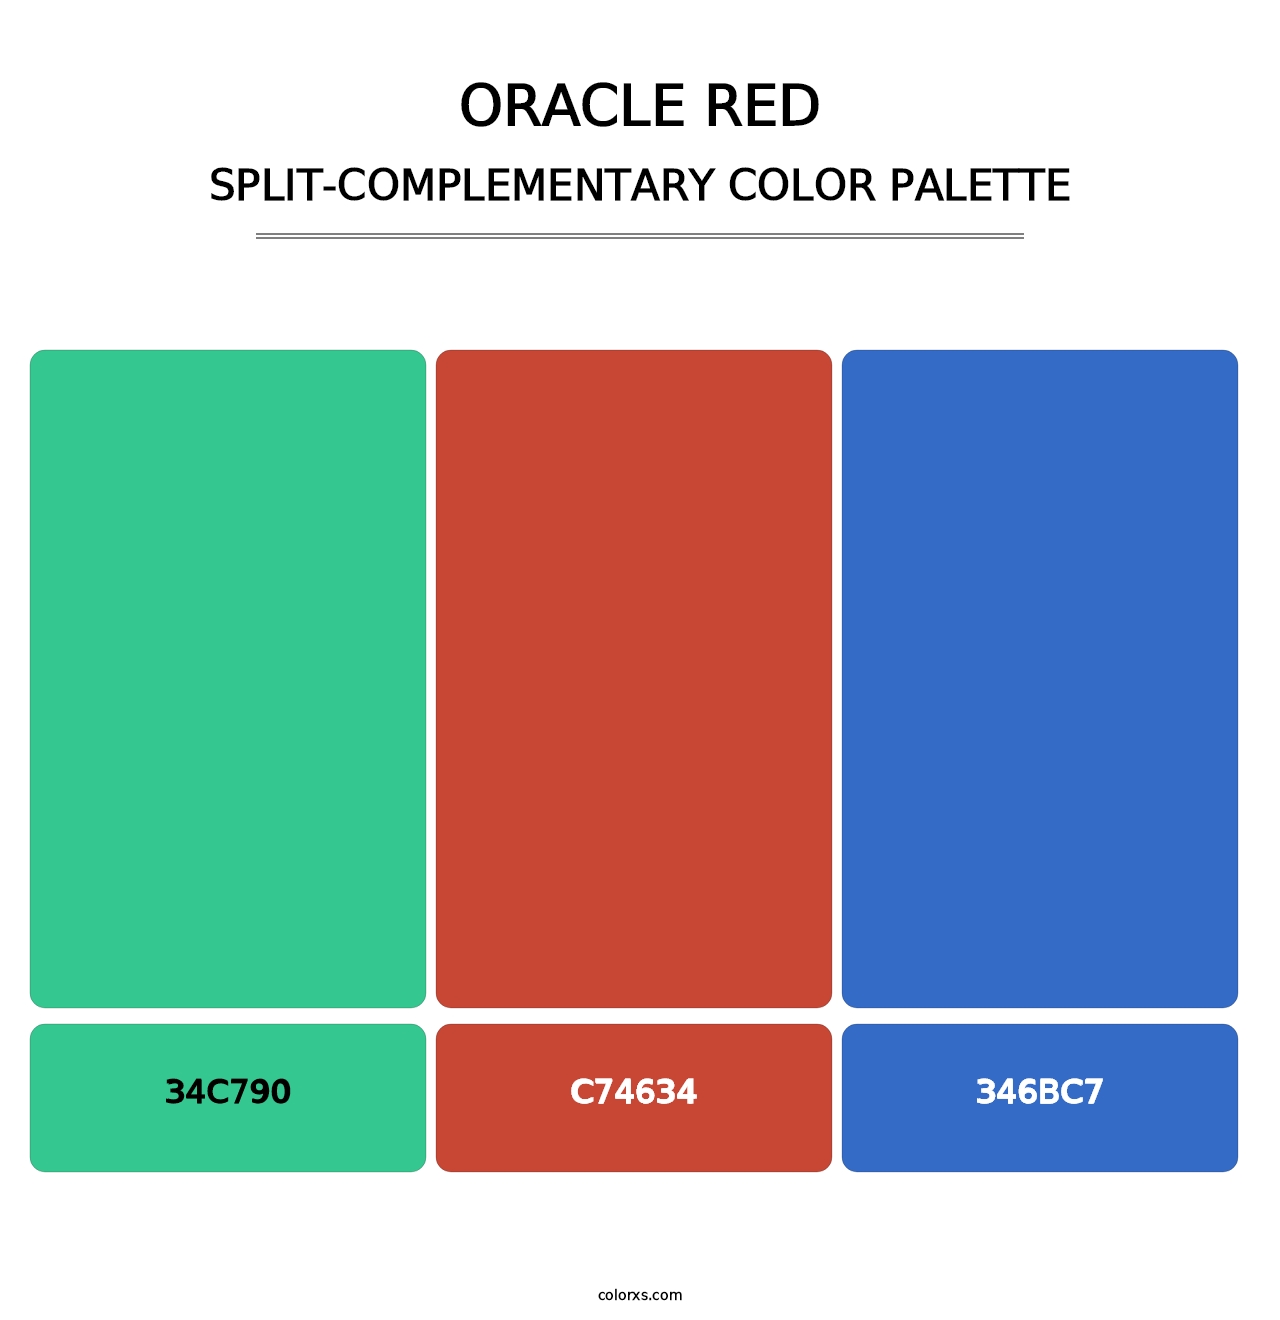 Oracle Red - Split-Complementary Color Palette